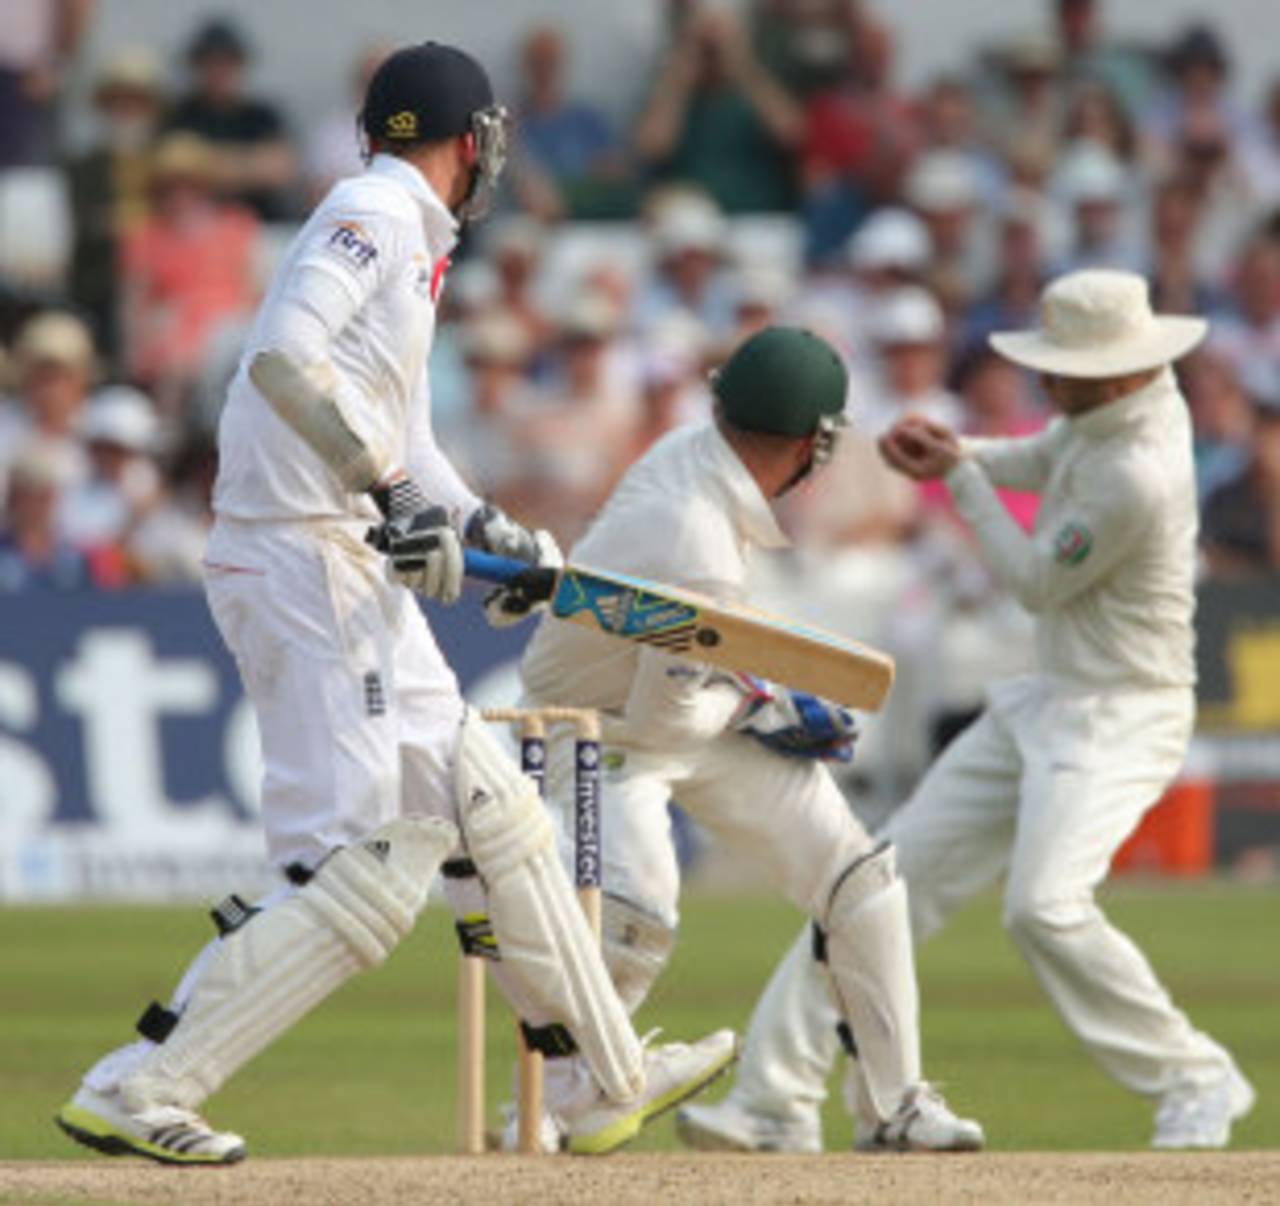 A third umpire with access to instant replays could overrule obvious on-field mistakes&nbsp;&nbsp;&bull;&nbsp;&nbsp;PA Photos